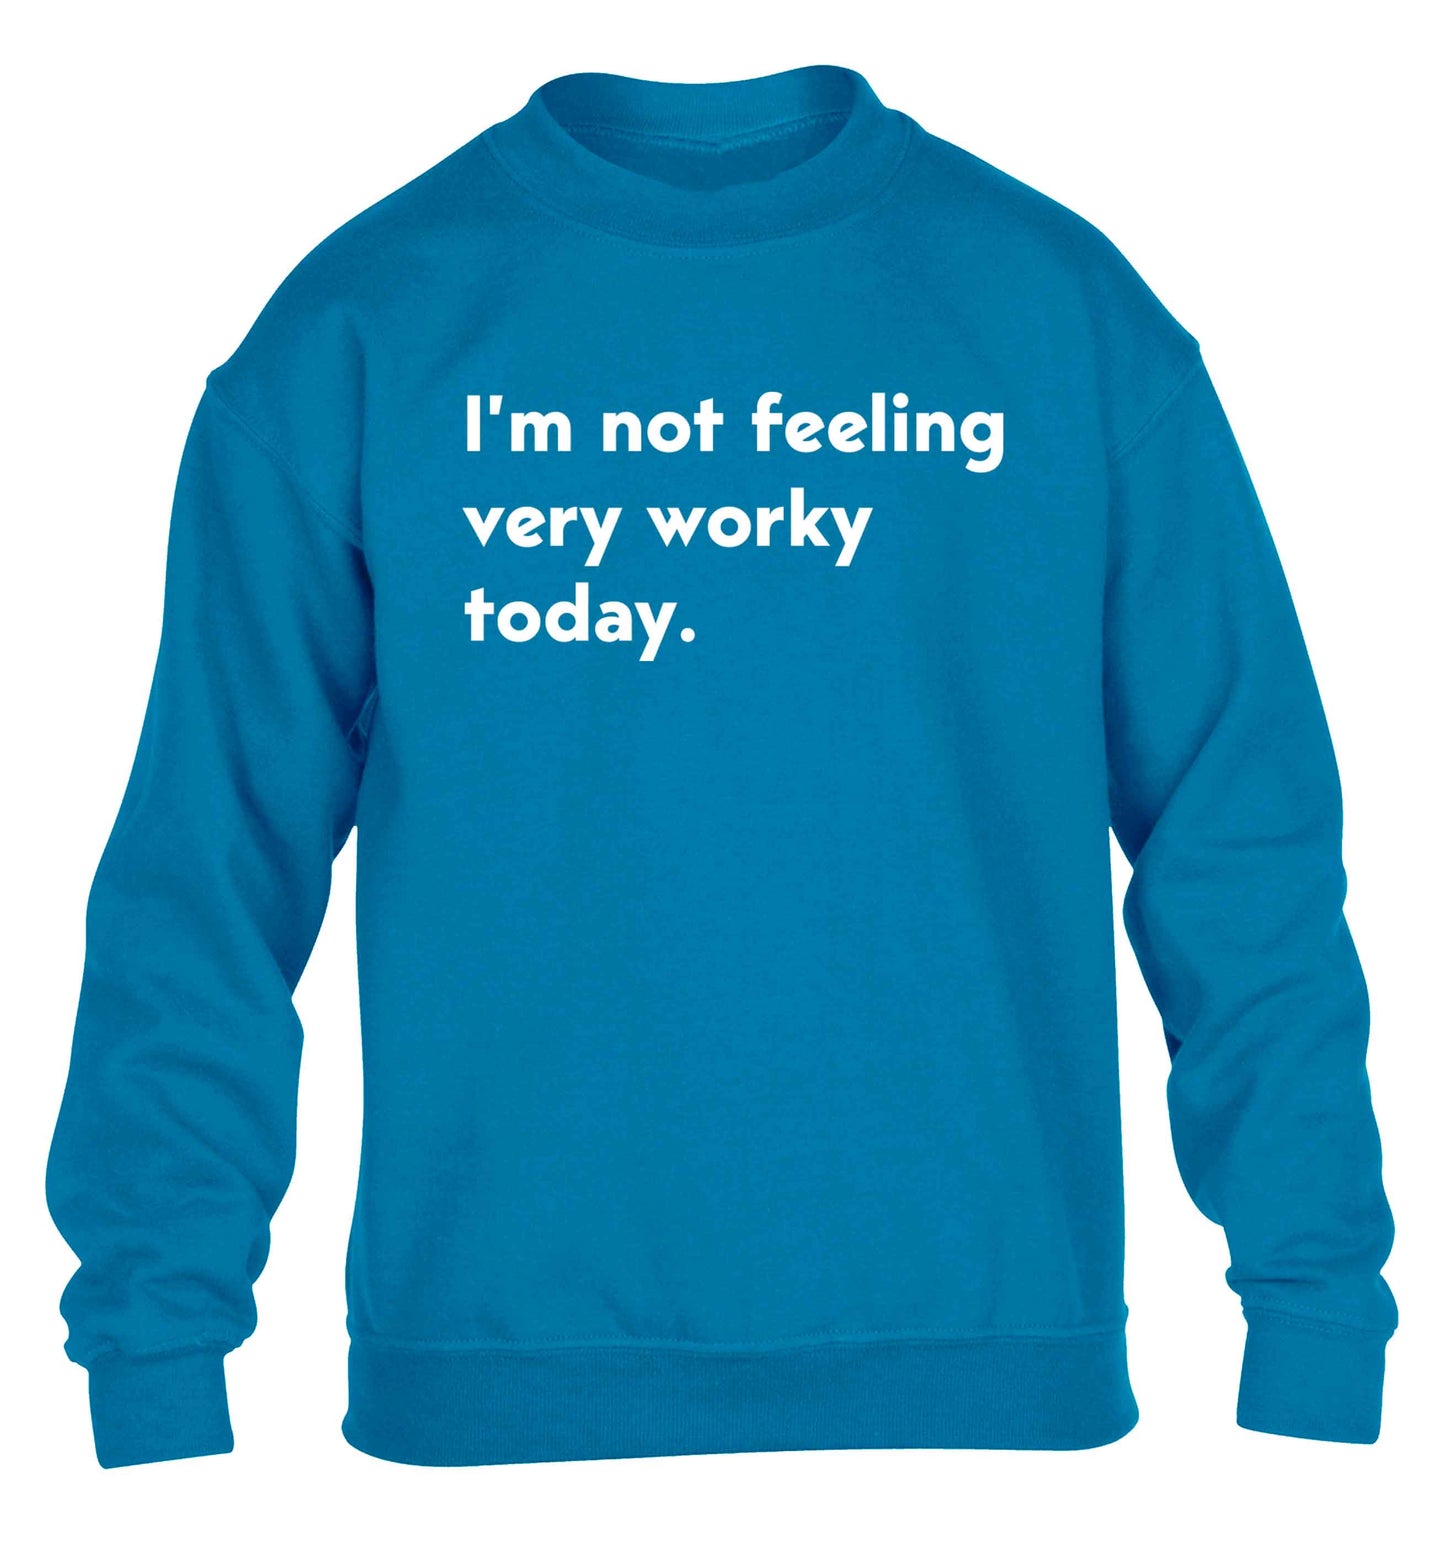 I'm not feeling very worky today children's blue sweater 12-13 Years